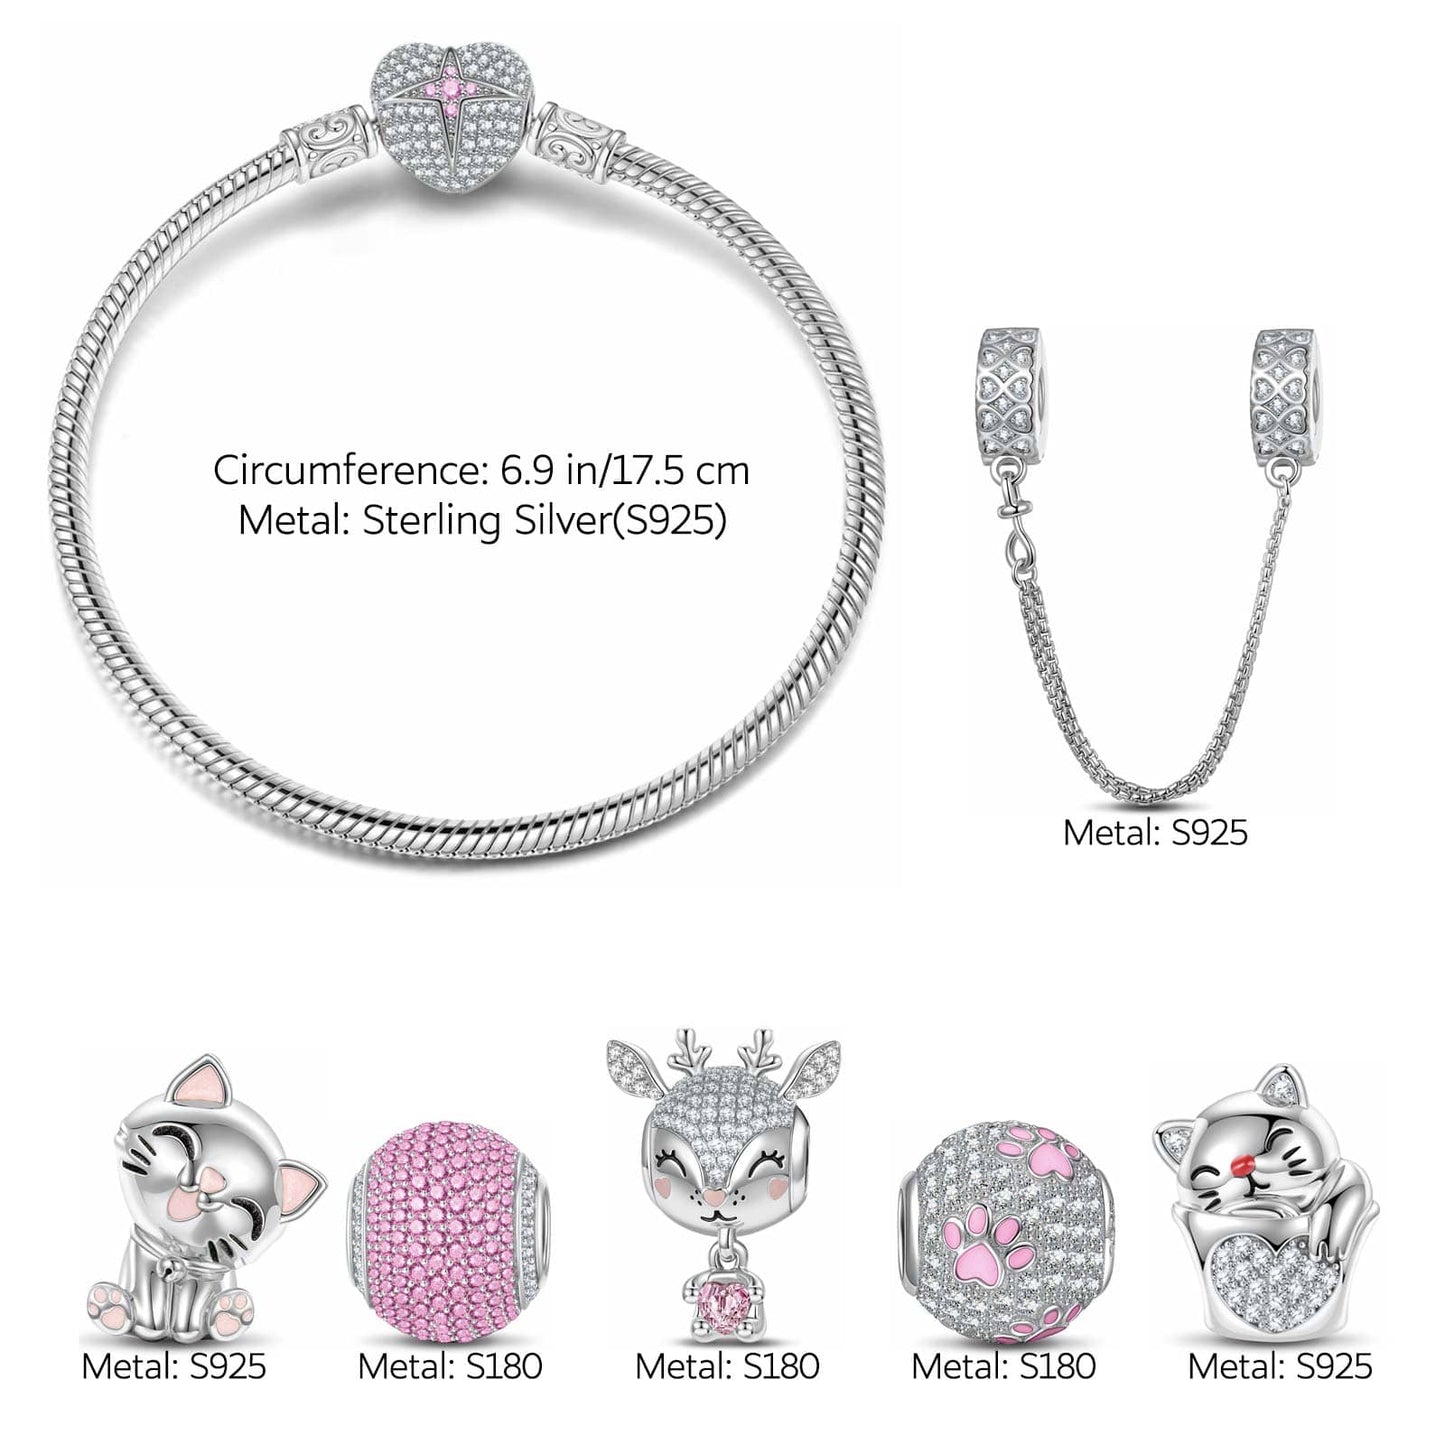 Sterling Silver Kitten and Reindeer Animals Charms Bracelet Set With Enamel In White Gold Plated - Heartful Hugs Collection